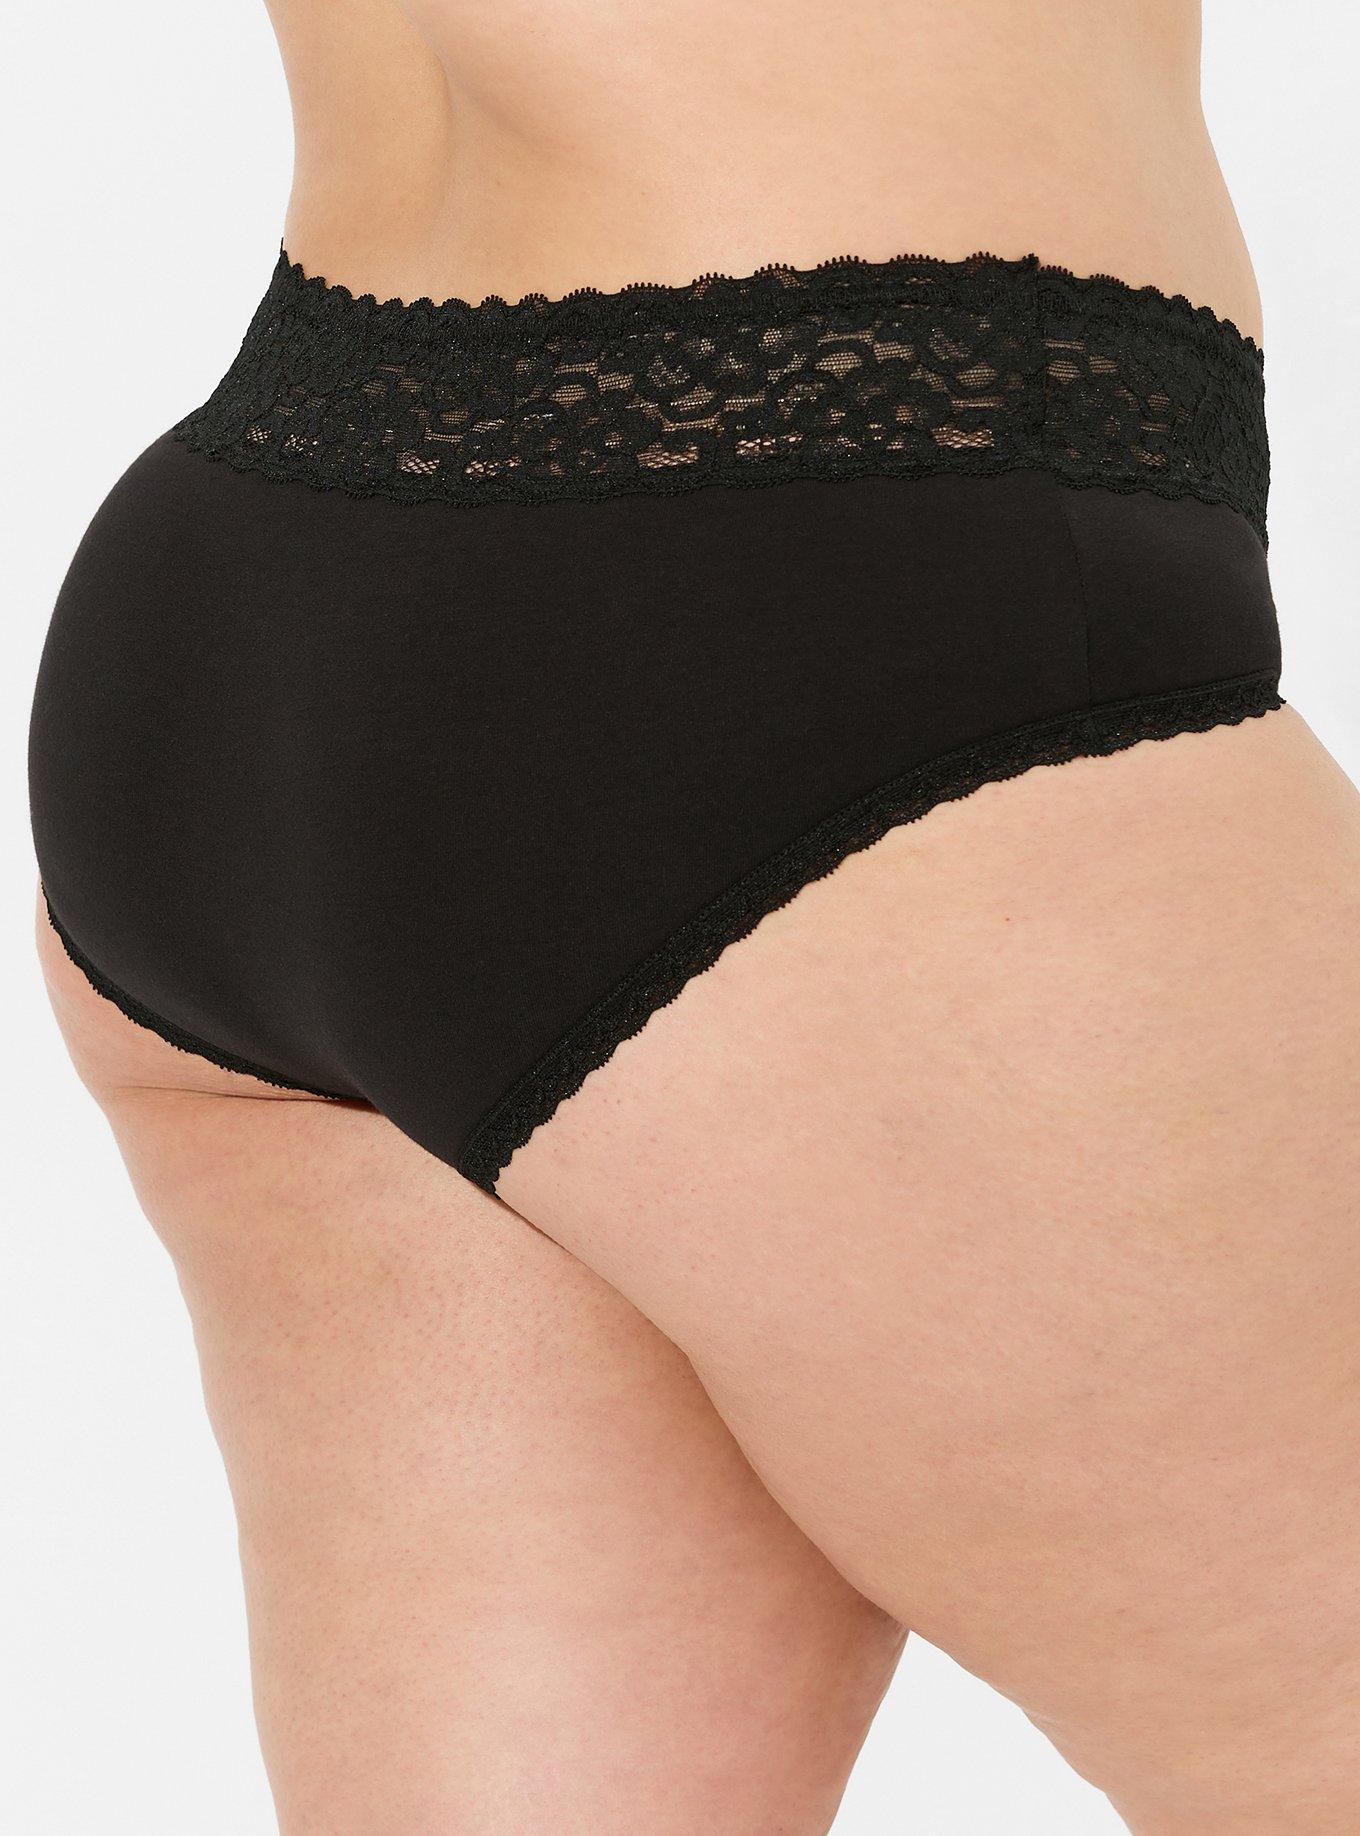 Cotton Full Brief Panty With Lace Trim